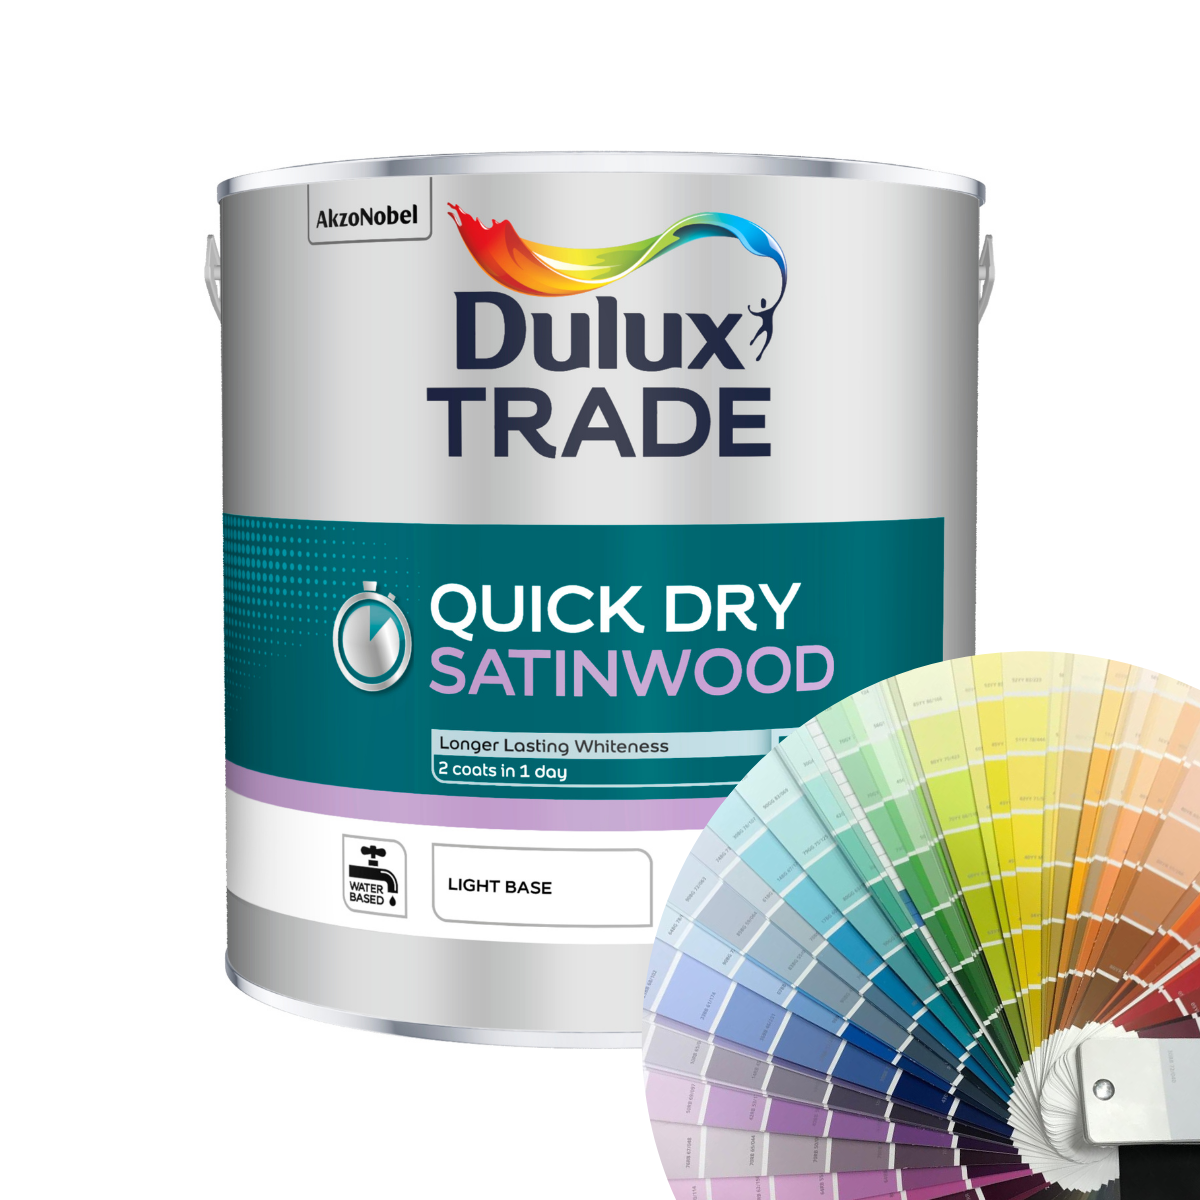 Dulux Trade Quick Dry Satinwood - Tinted Colour